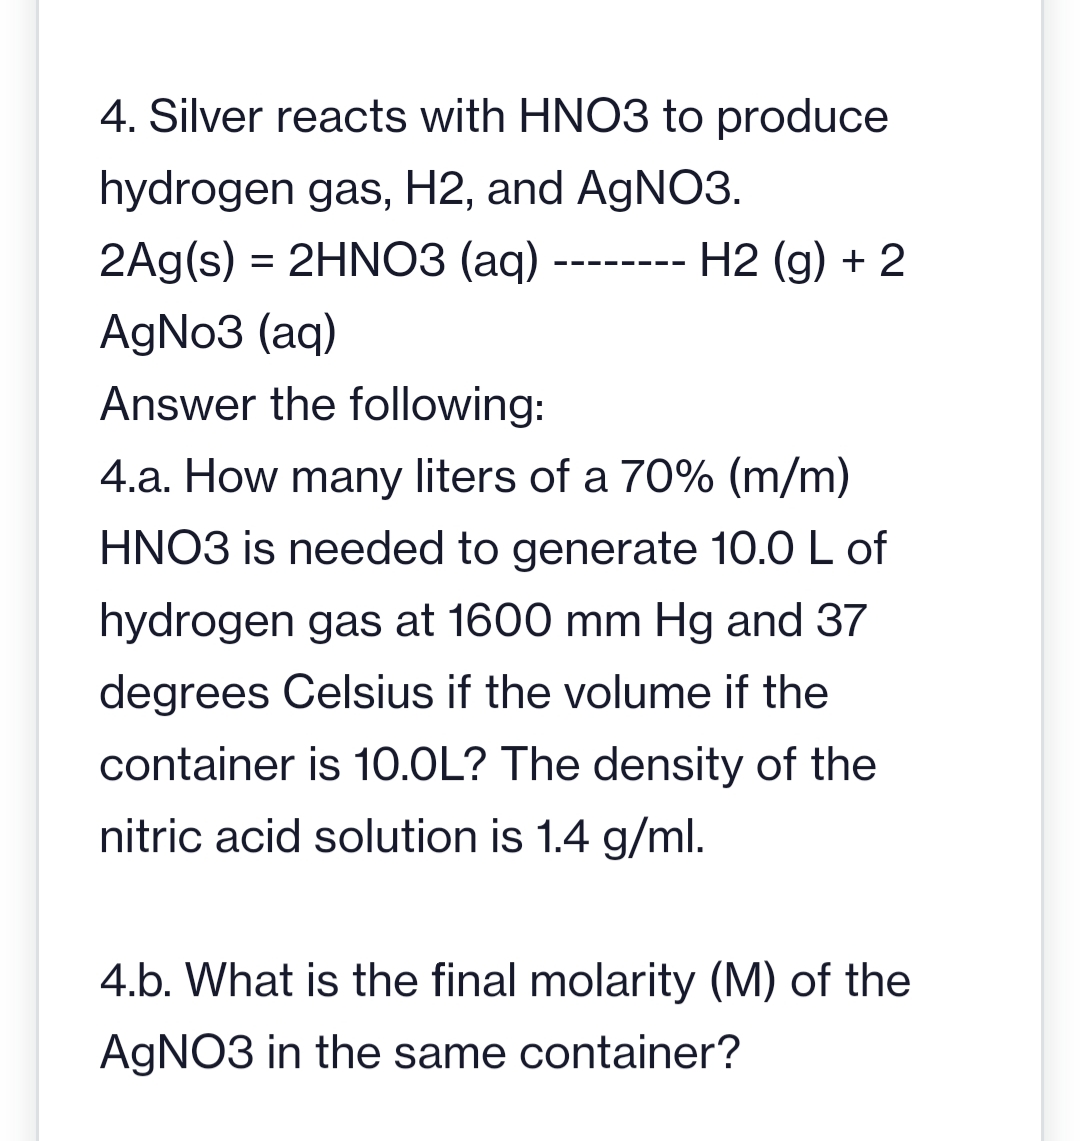 4. Silver reacts with HNO3 to produce
hydrogen gas, H2, and AgNO3.
2Ag(s) = 2HNO3(aq)
AgNo3 (aq)
Answer the following:
‒‒‒‒‒‒‒‒
H2 (g) + 2
4.a. How many liters of a 70% (m/m)
HNO3 is needed to generate 10.0 L of
hydrogen gas at 1600 mm Hg and 37
degrees Celsius if the volume if the
container is 10.0L? The density of the
nitric acid solution is 1.4 g/ml.
4.b. What is the final molarity (M) of the
AgNO3 in the same container?